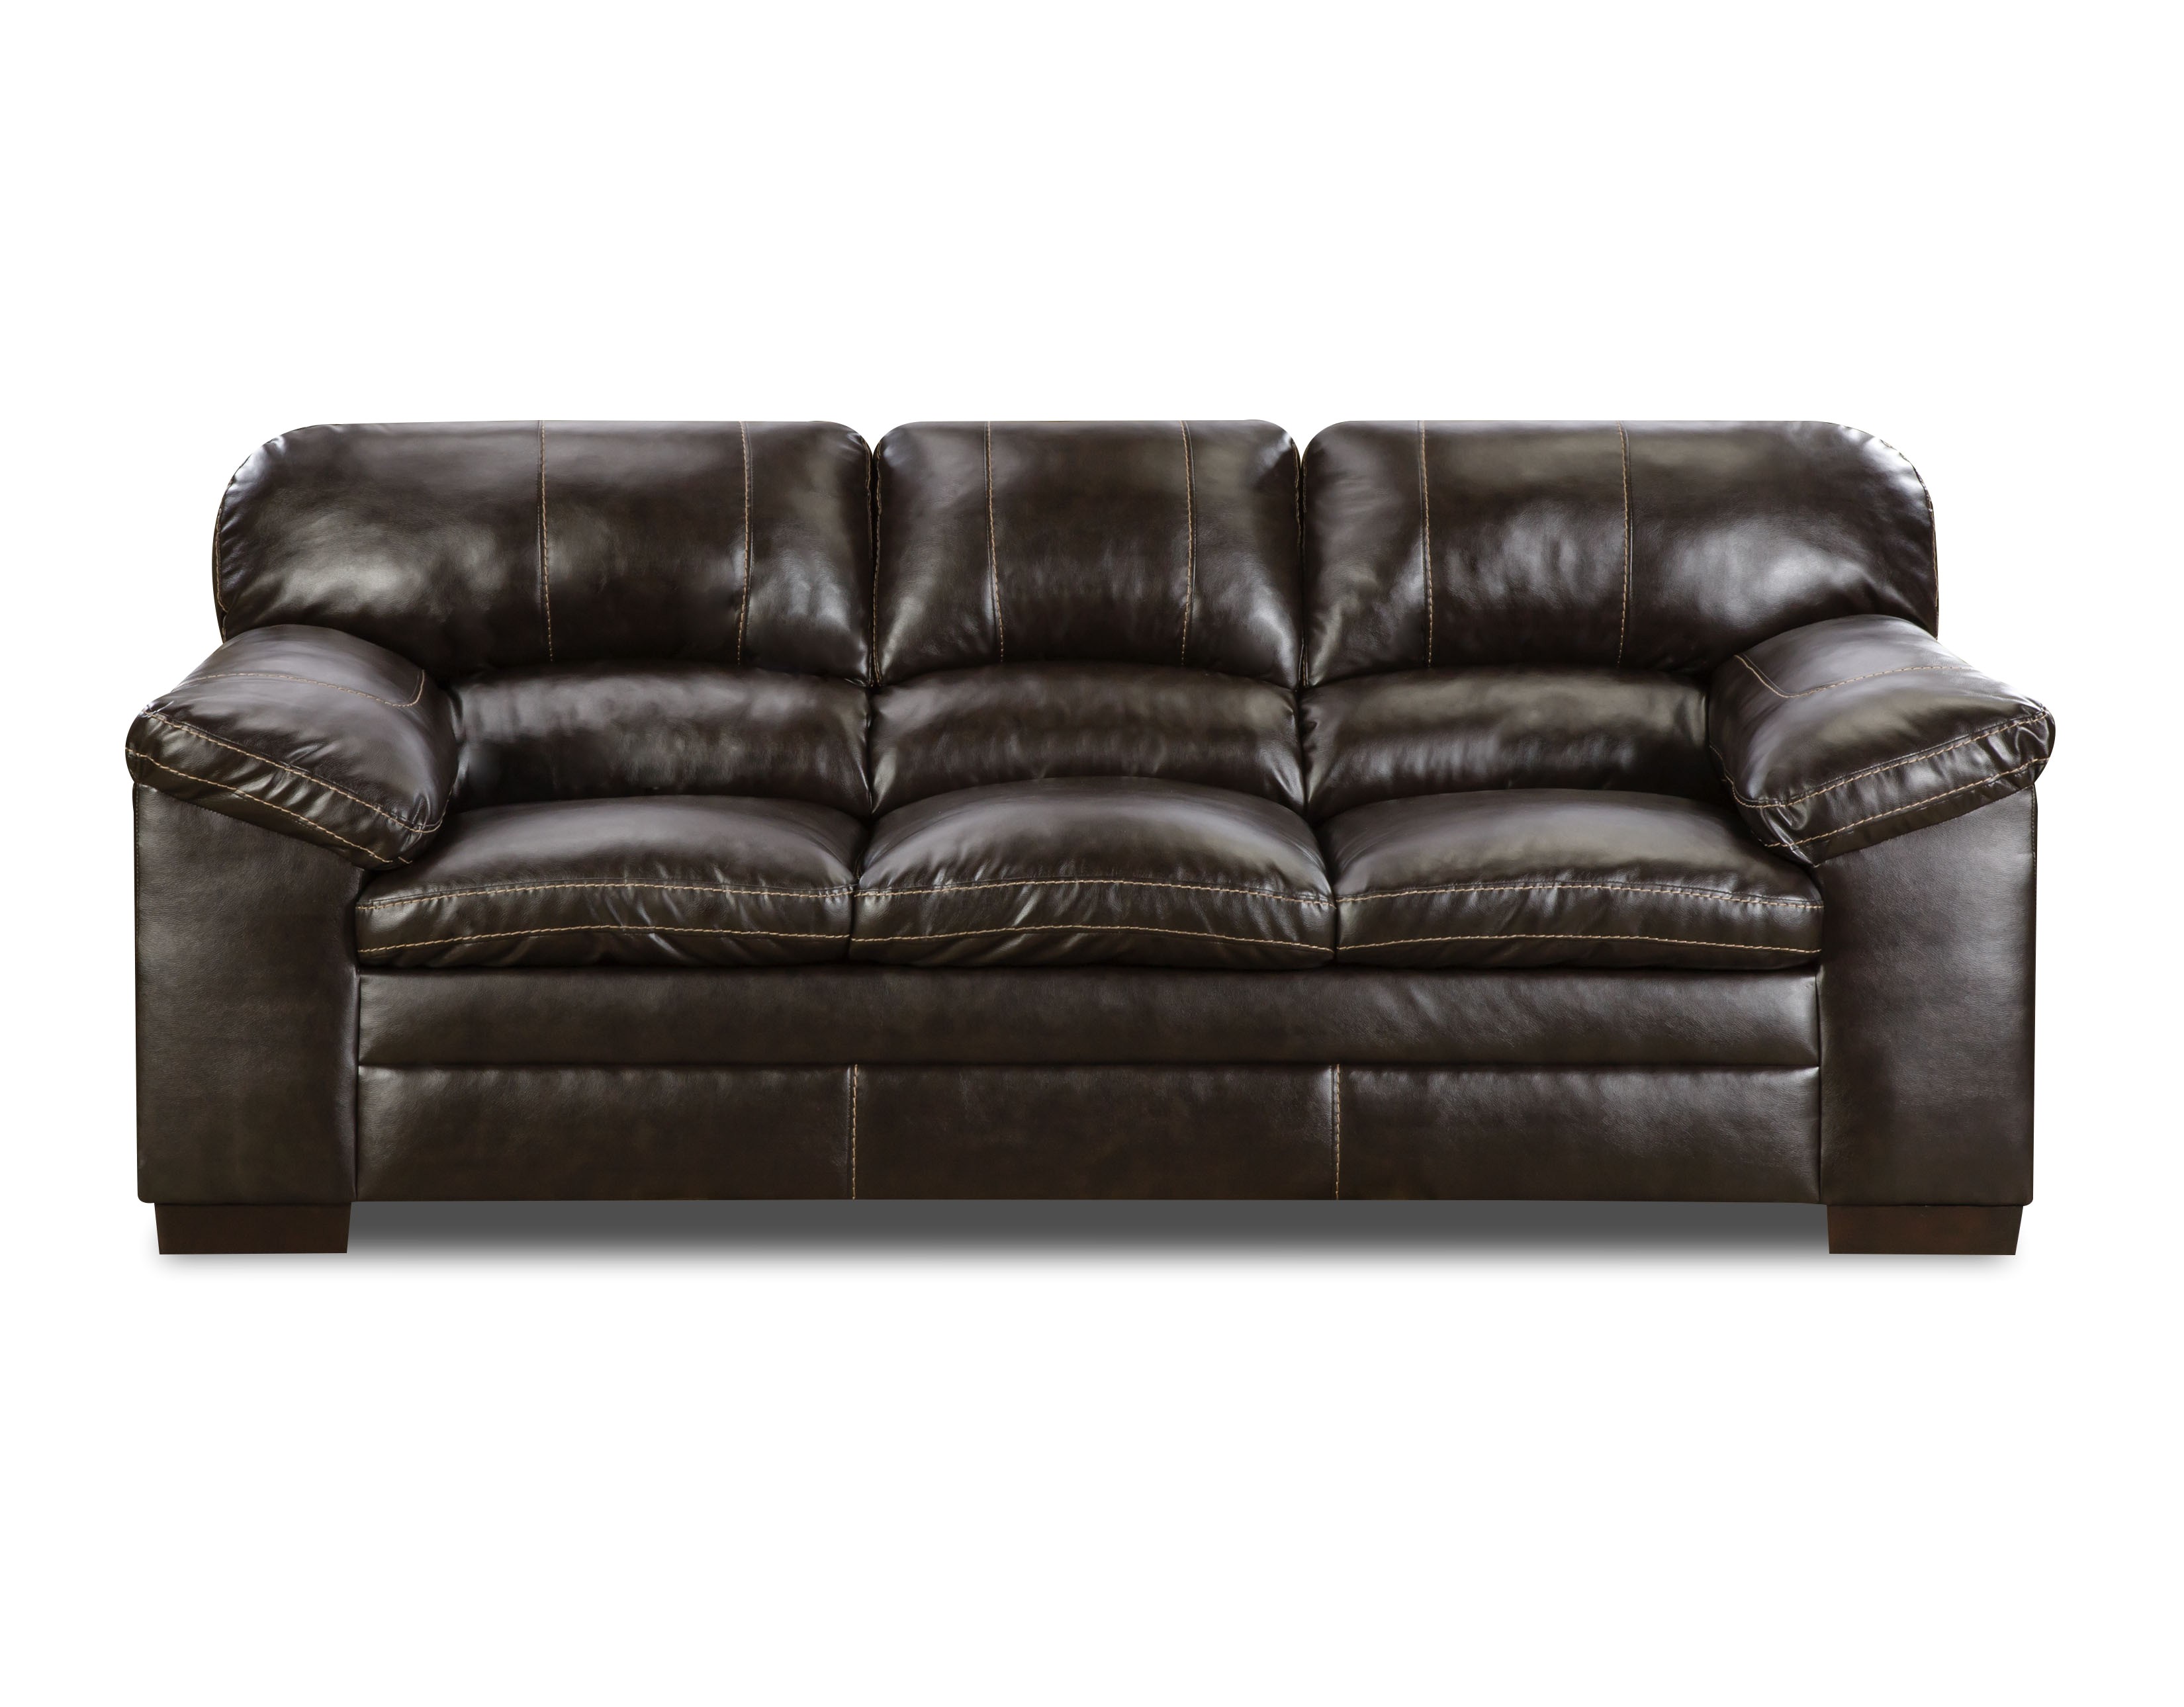 decorating captivating faux leather sofa and loveseat 12 prod 2258092012 hei 64 wid qlt 50